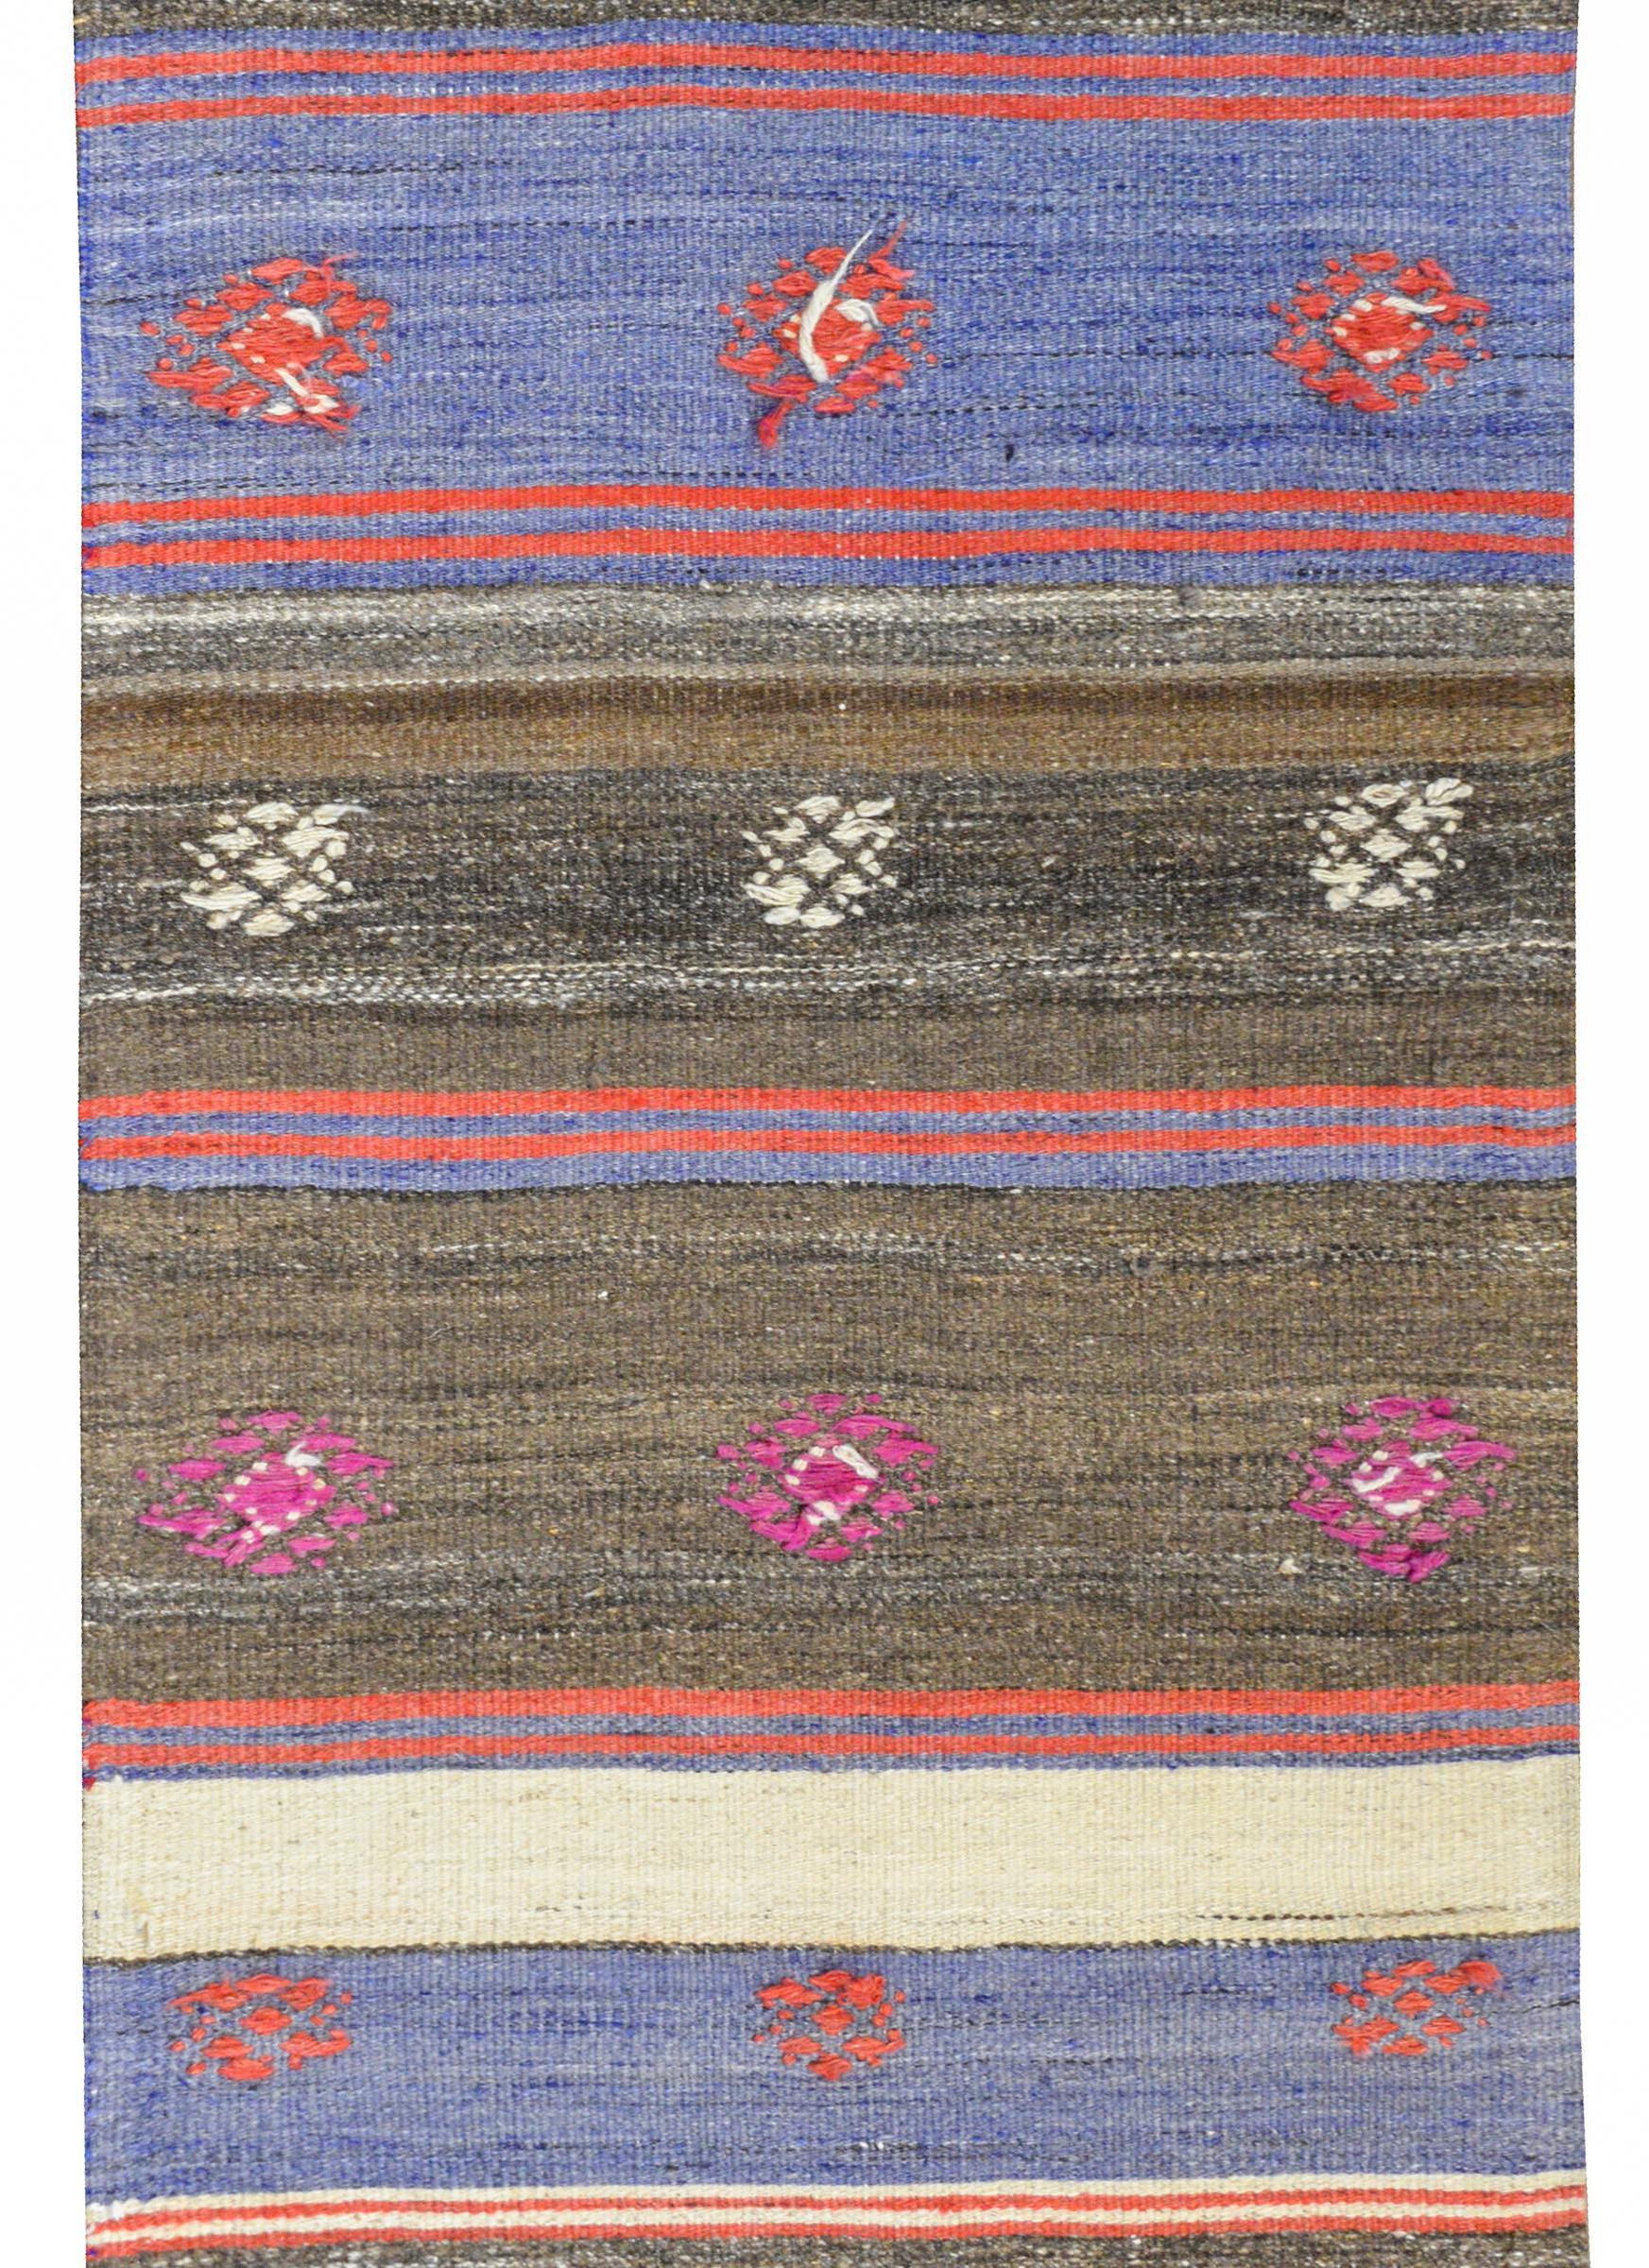 A wonderful vintage Turkish Konya Kilim runner with beautiful natural brown, black, cream, and gray stripes mixed with crimson and lavender vegetable dyed stripes, all with embroidered stylized flowers across the field.